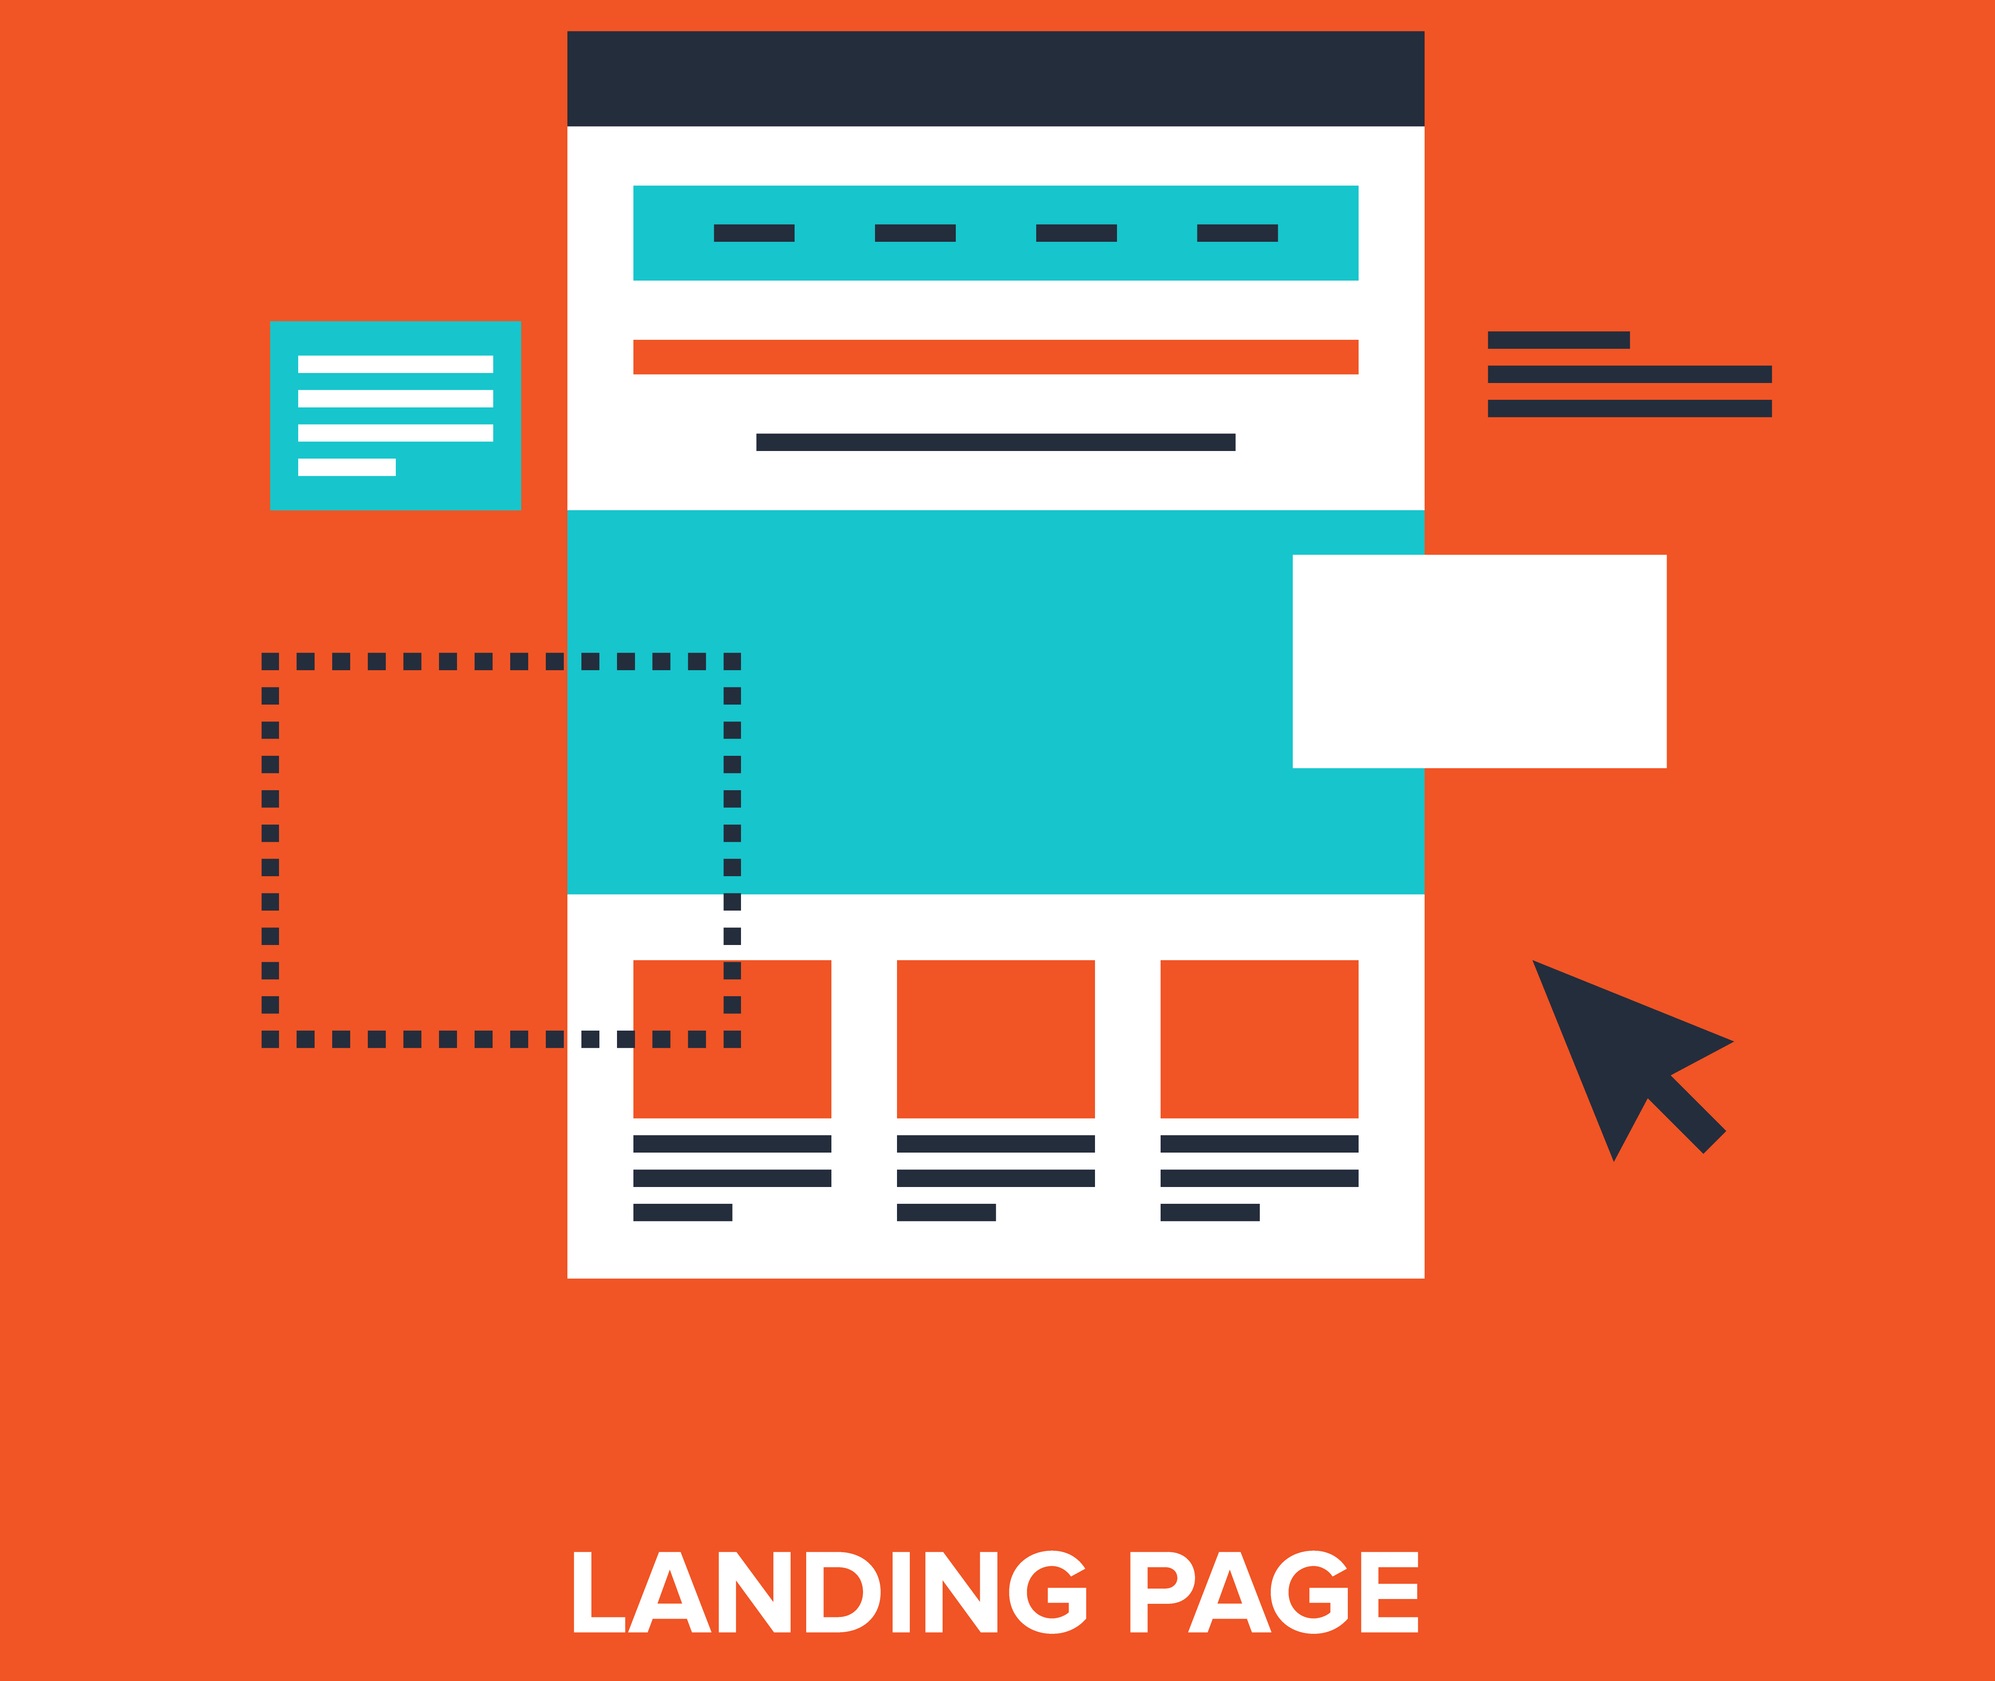 layout of a website landing page